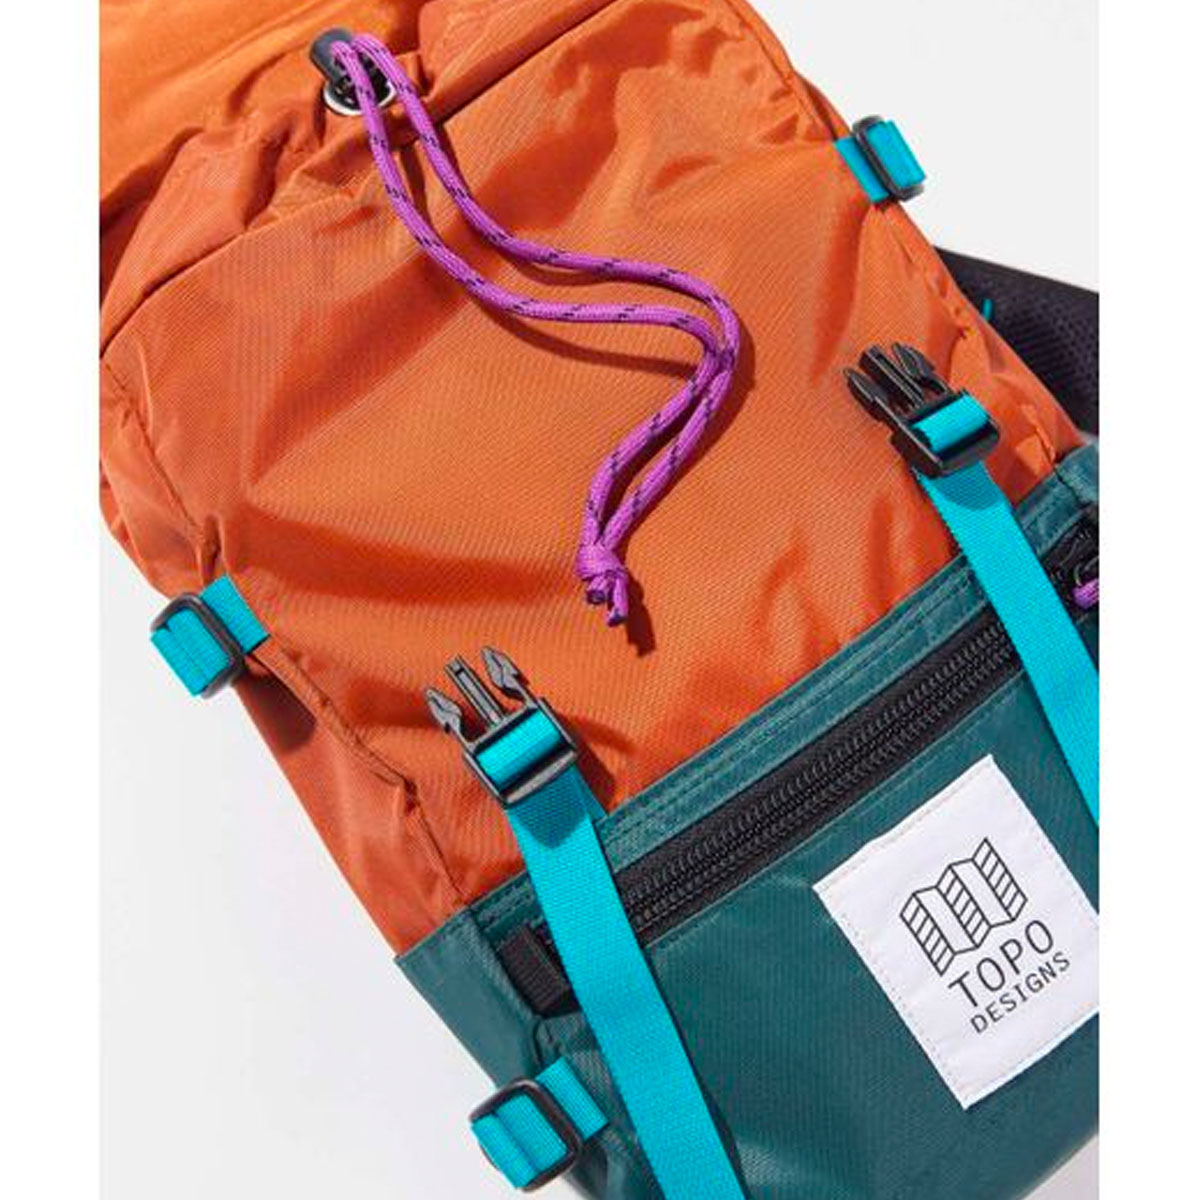 Topo Designs Rover Pack - Mini Botanic Green/Clay, statement-making bag that’s the perfect size for errands around town or on the trail